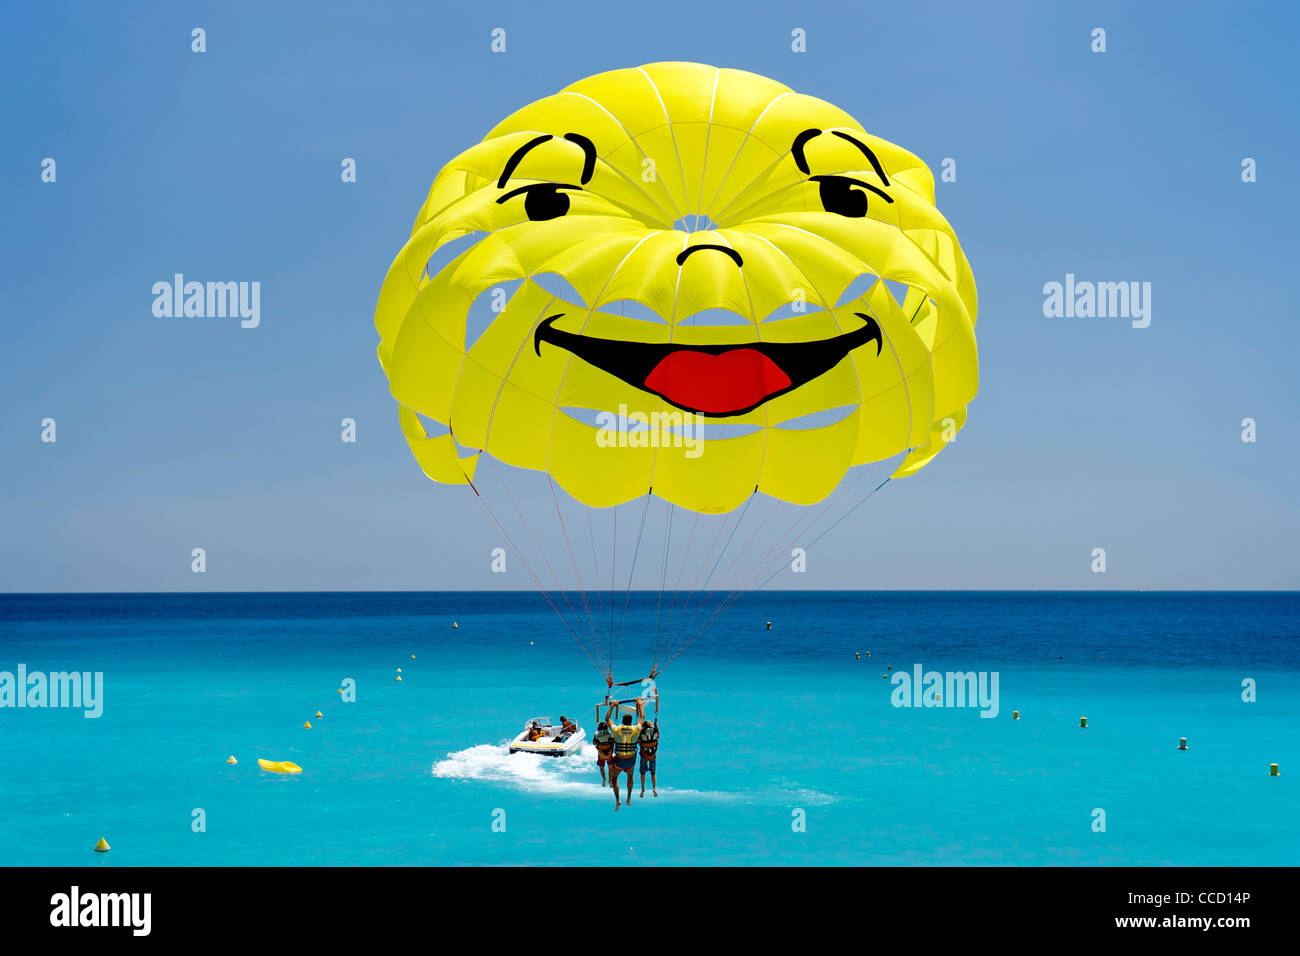 Smiley-faced parasail in the Baie des Anges (Bay of Angels) in Nice on the Mediterranean coast in southern France. Stock Photo